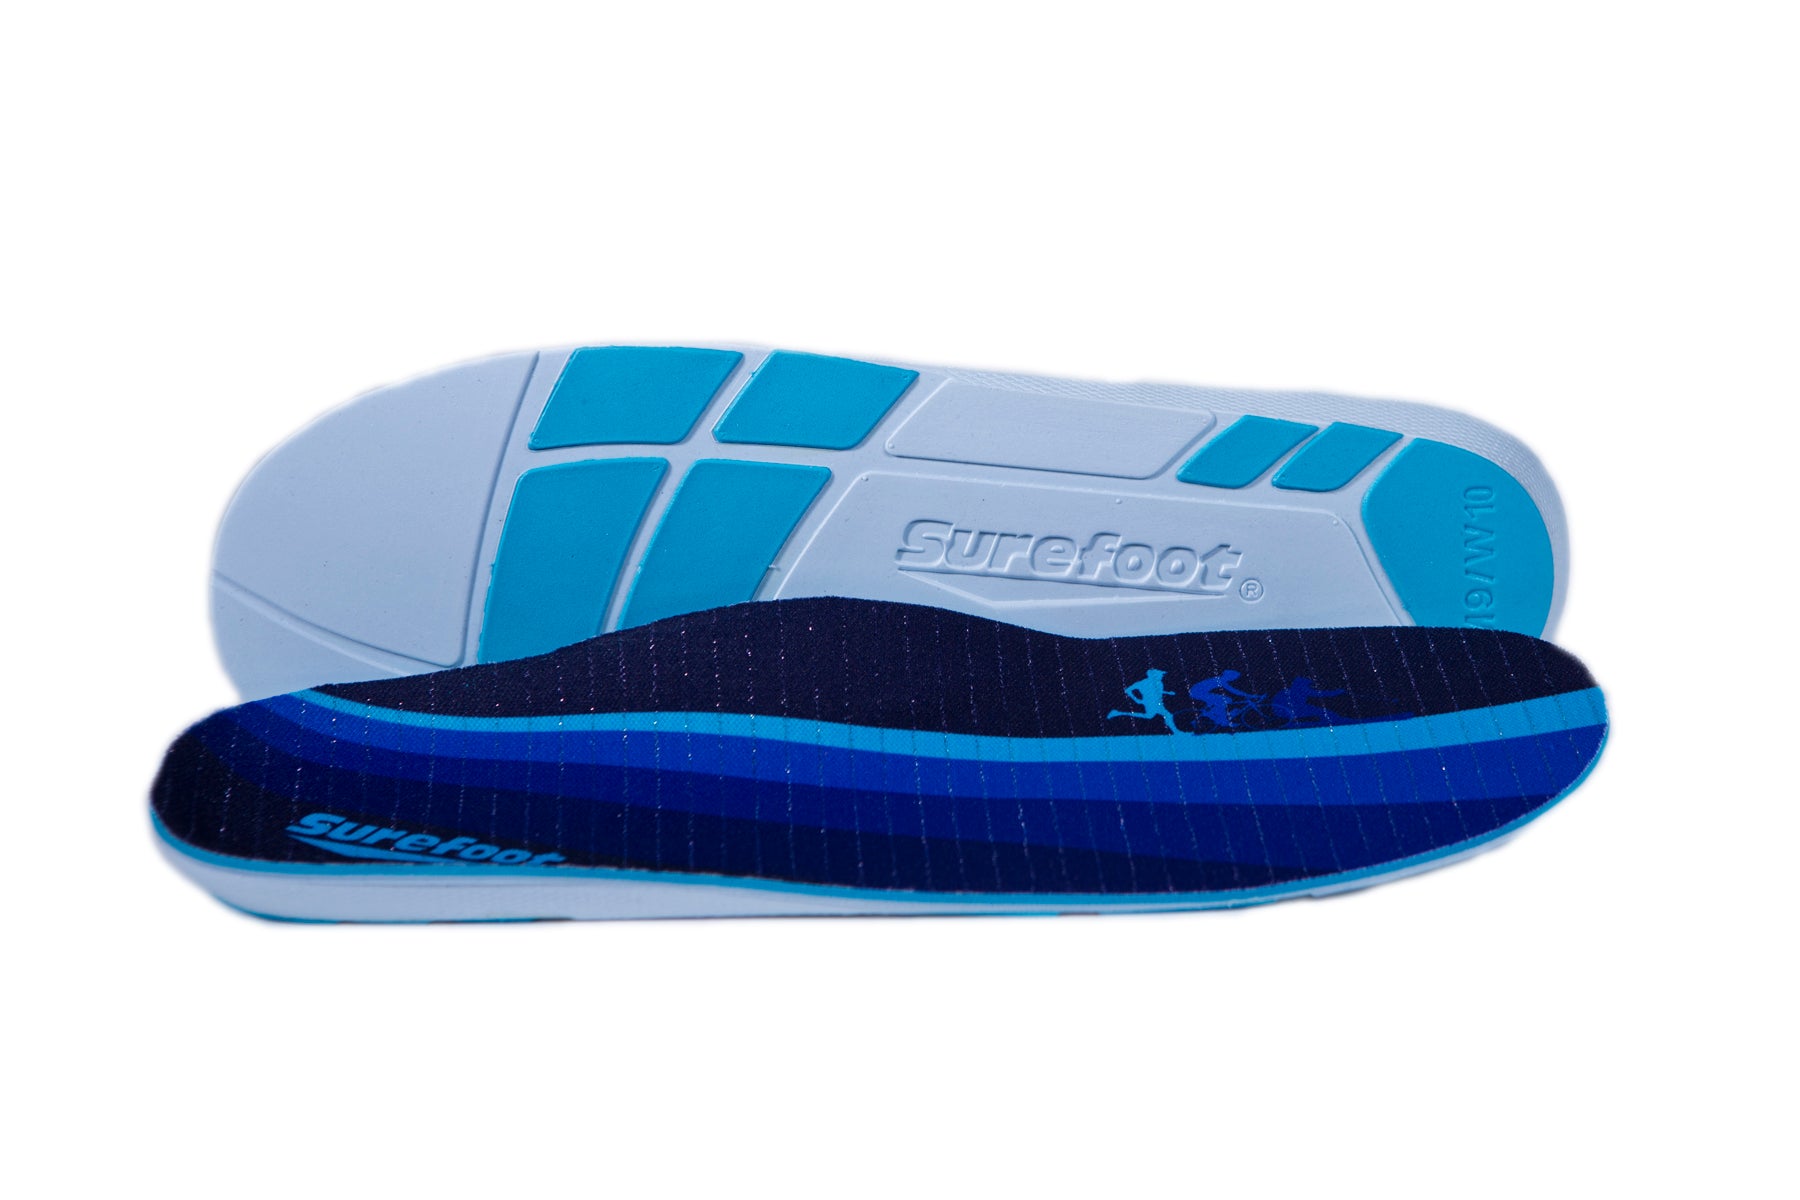 Blue Surefoot Conforma Insole, Surefoot logo underneath and on top sheet.